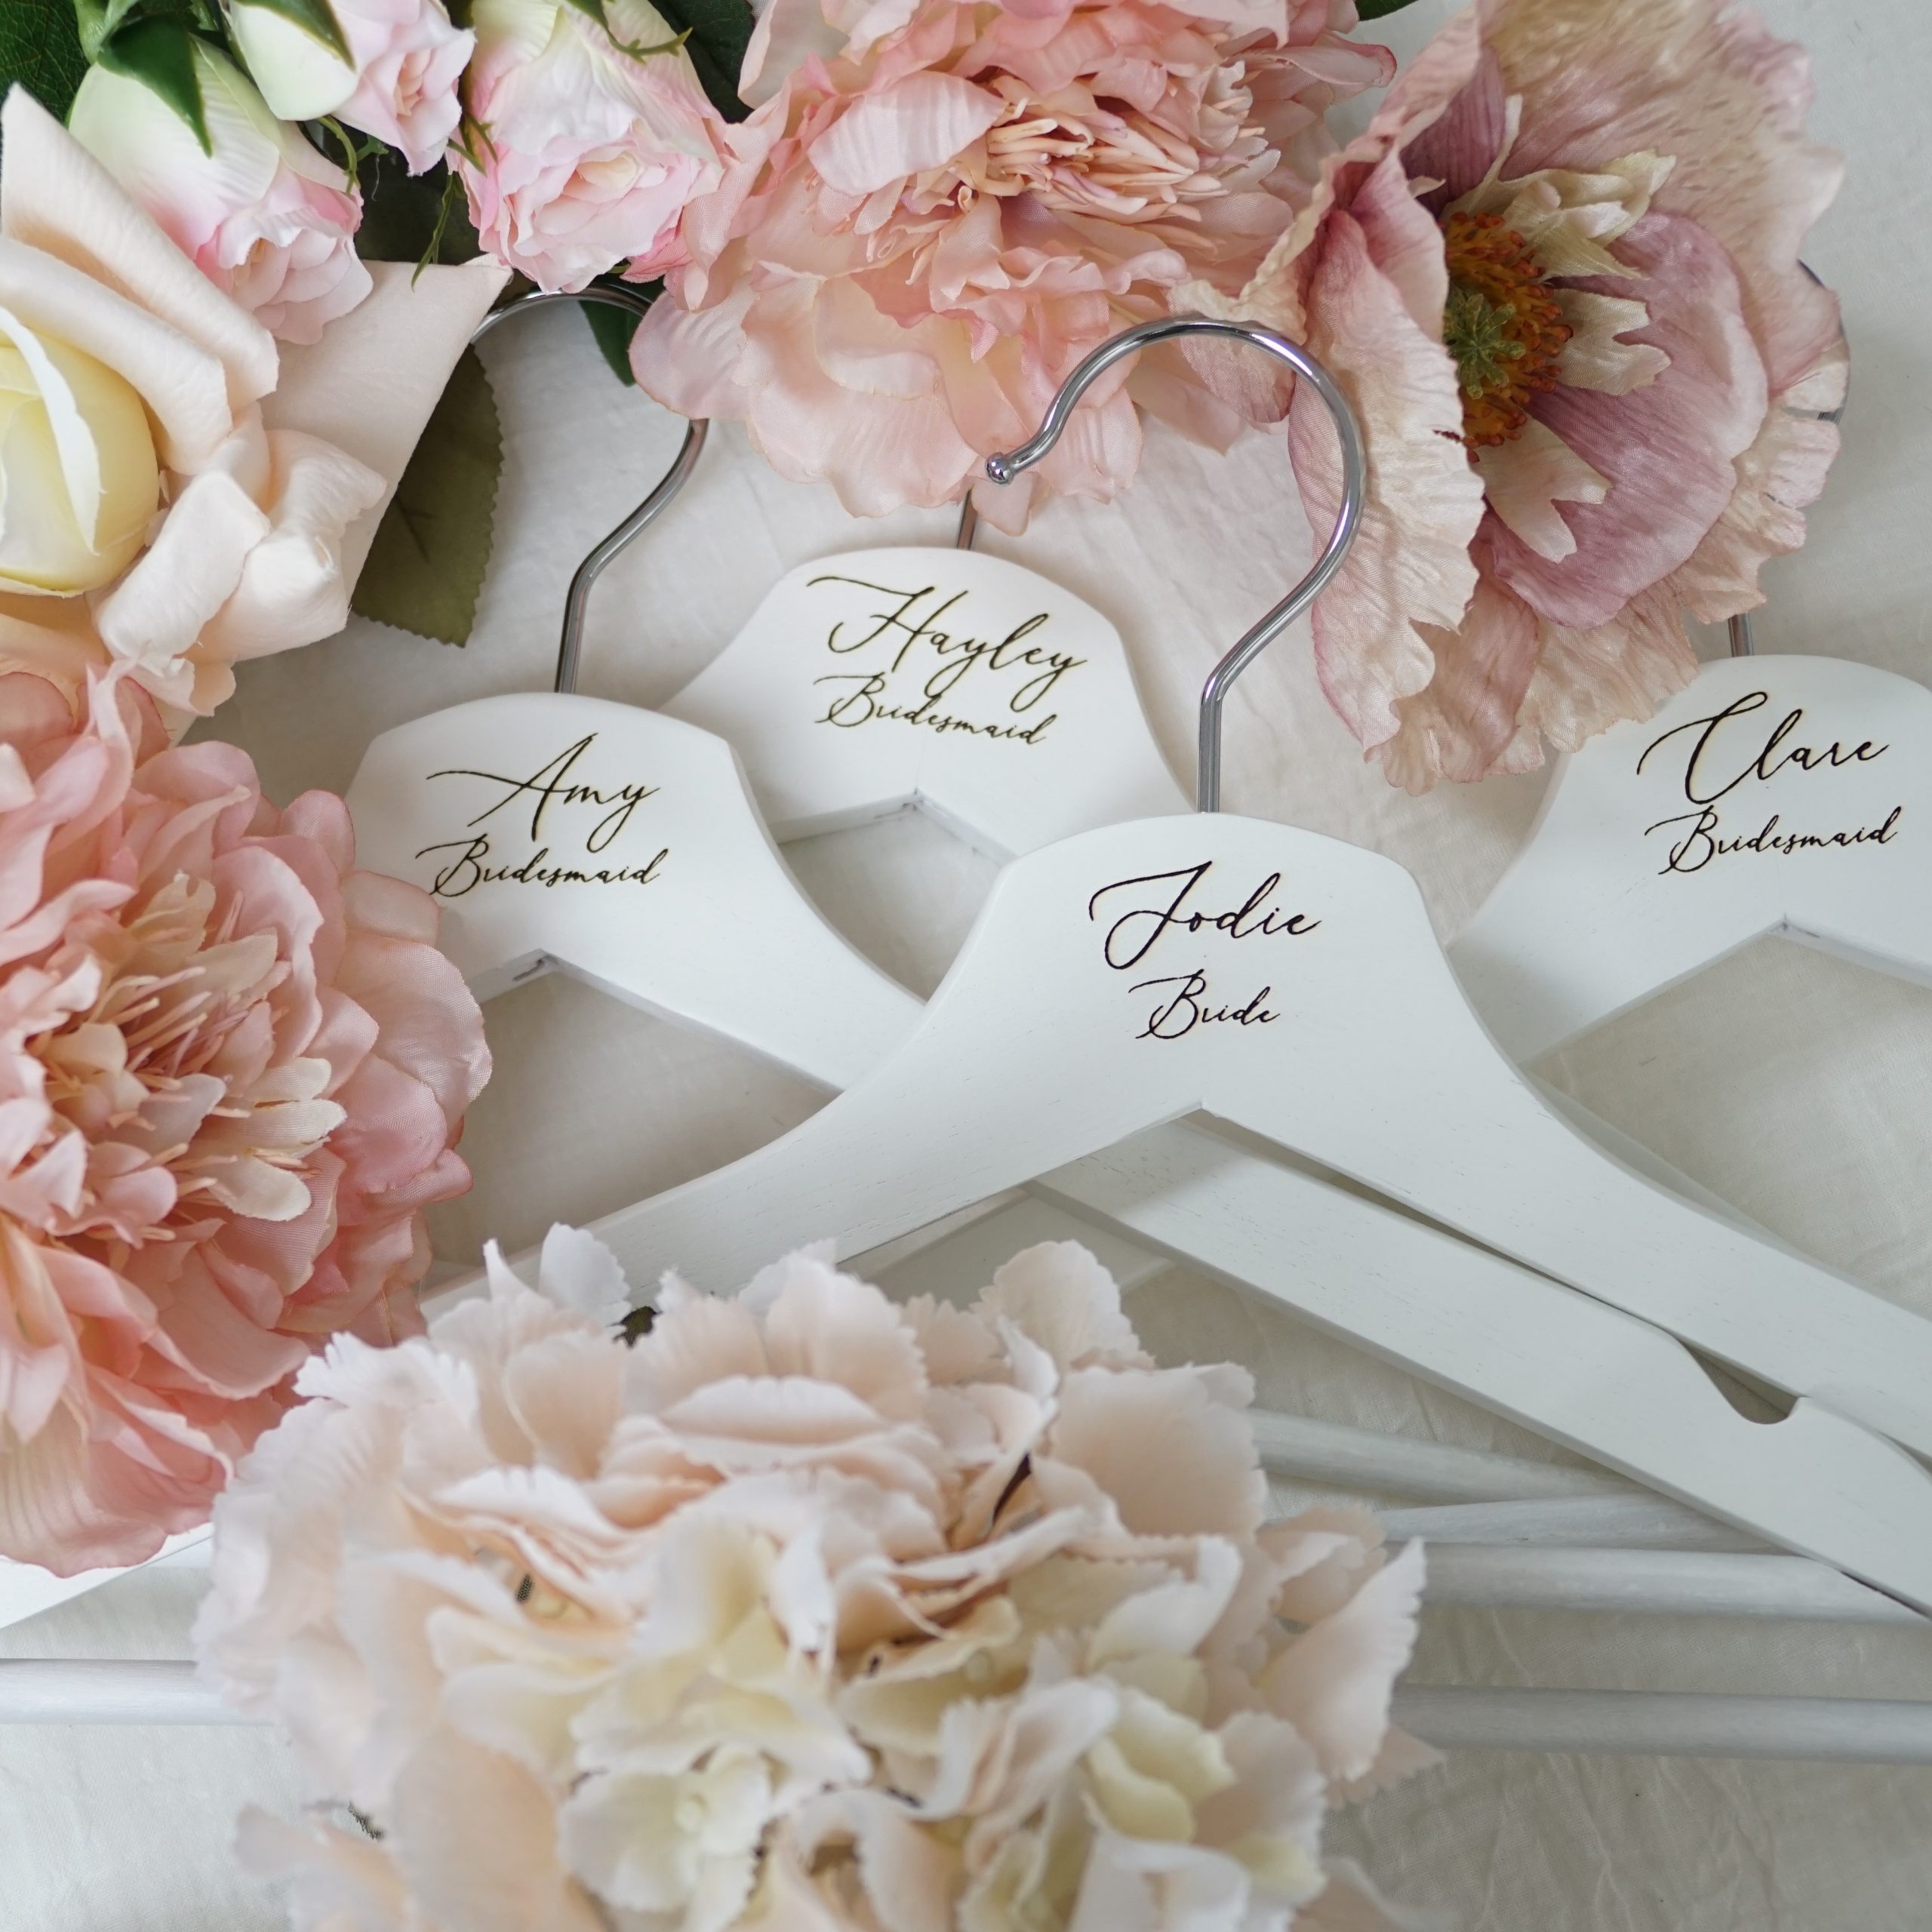 Personalised hangers for bridesmaids